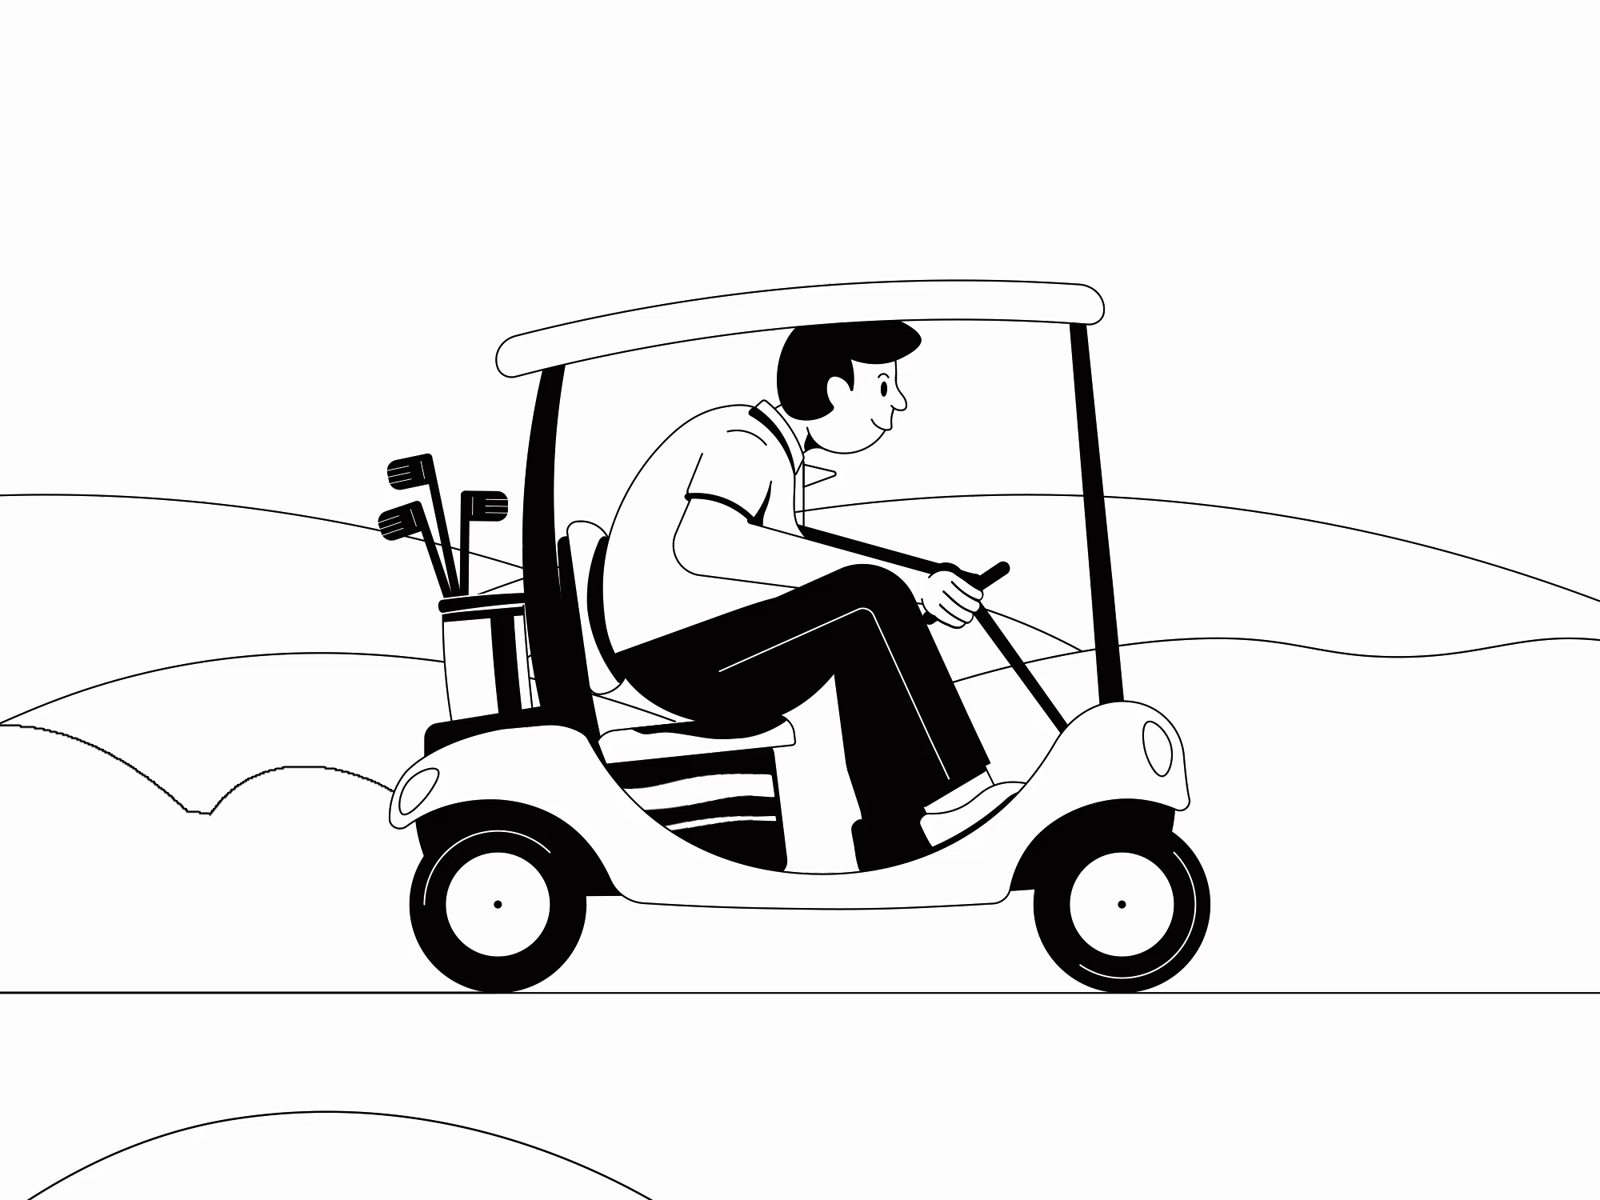 G is for golf ⛳ 36daysoftype animation car golf loop motion design paralax rigging